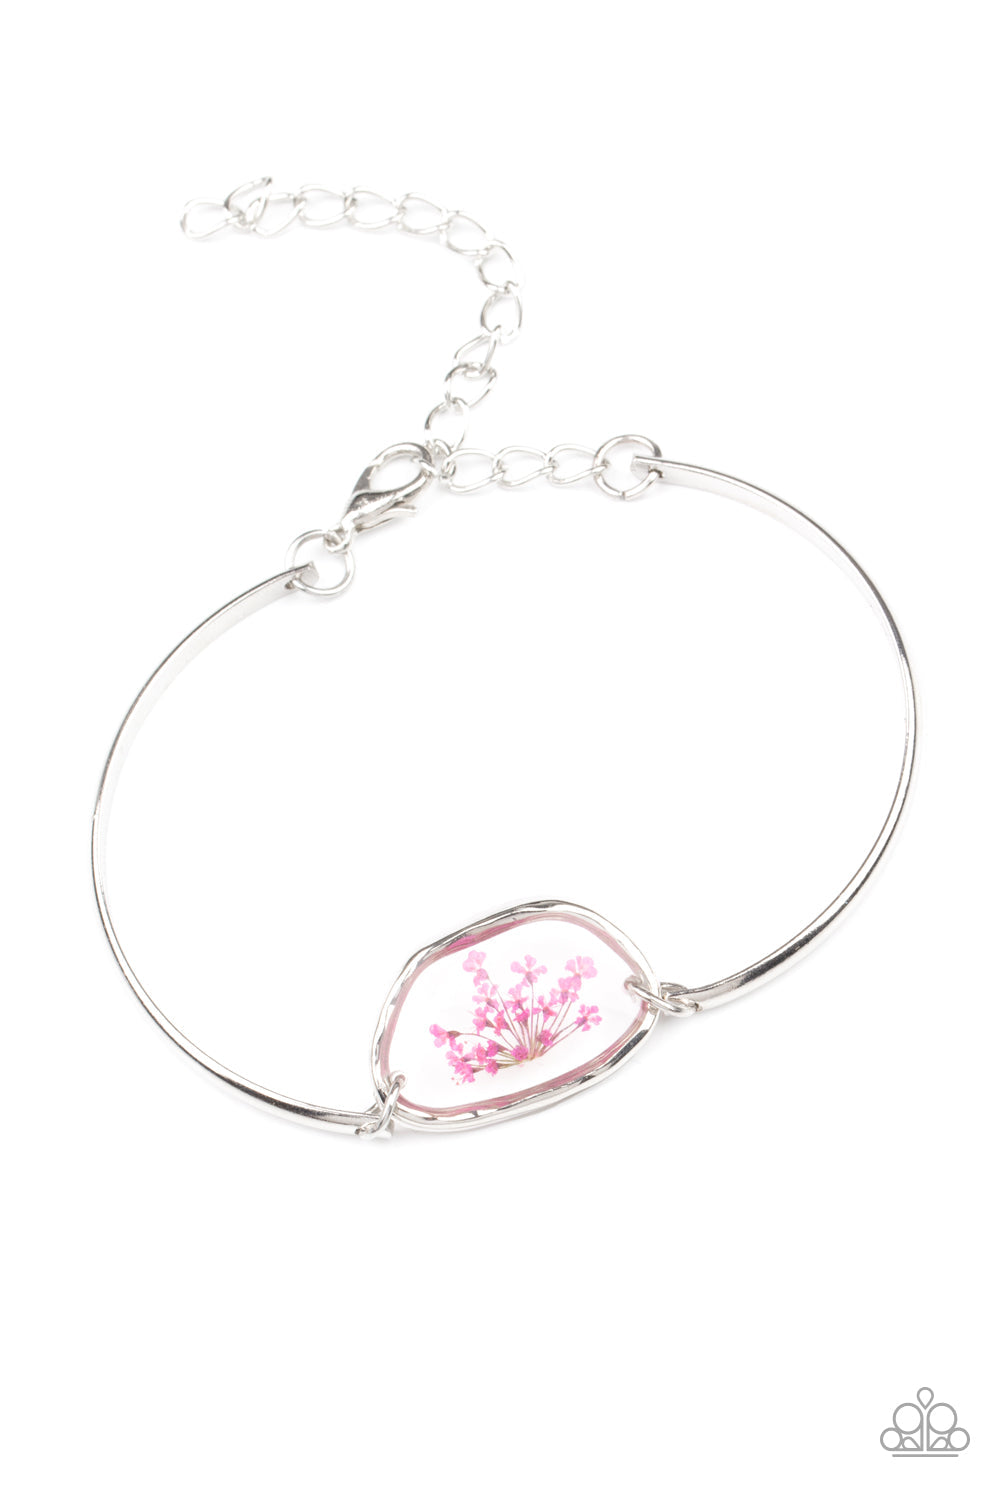 Prairie Paradise - Pink Flower - Silver Bracelet - Paparazzi Accessories - Encased inside an asymmetrical glass casing, a dainty pink firework flower centerpiece attaches to two arcing silver bars around the wrist for a whimsical floral look. Features an adjustable clasp closure. Sold as one individual bracelet.